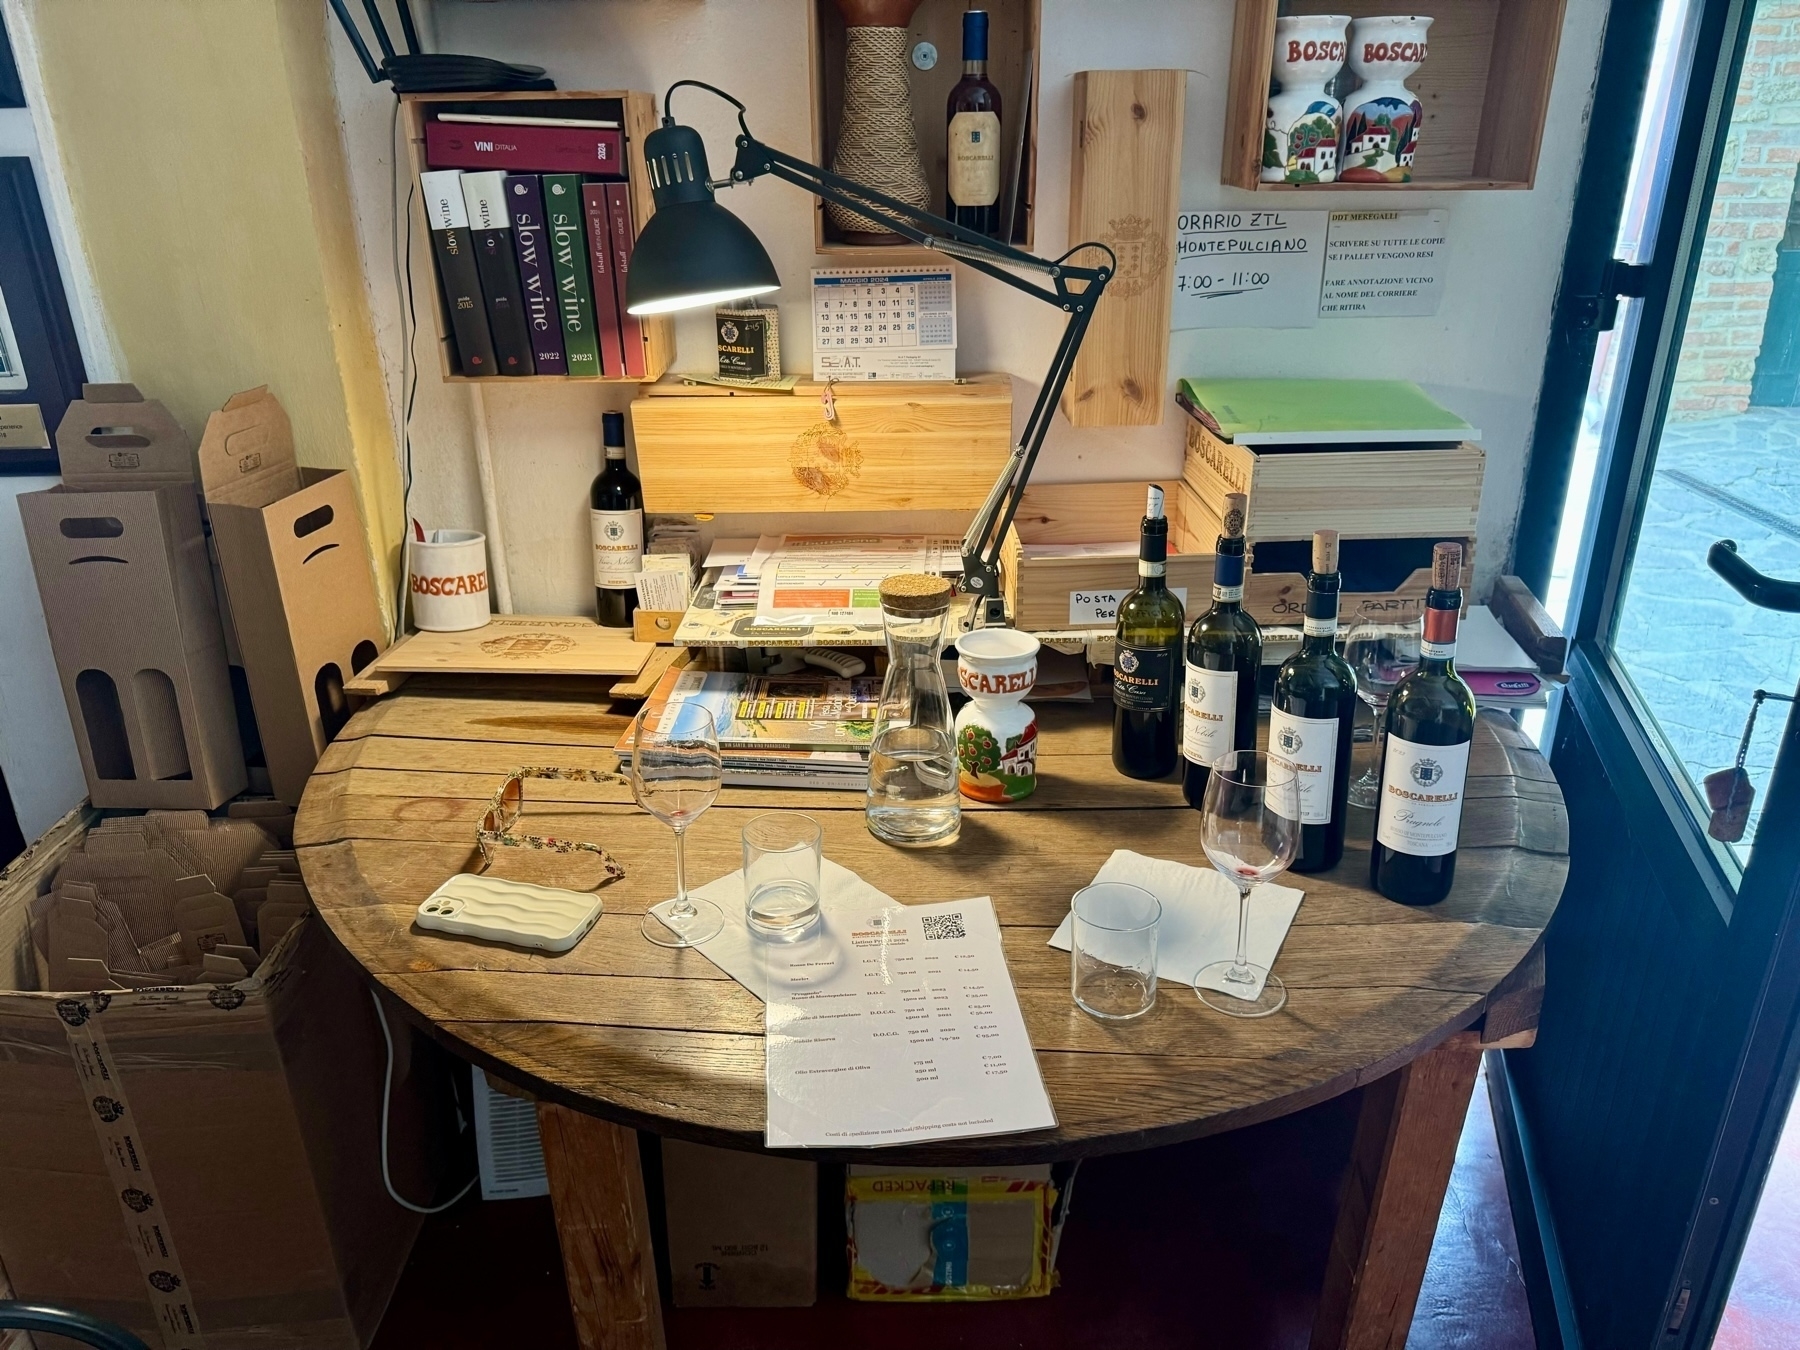 A rustic wooden table with various items, including wine bottles, glasses, papers, and a smartphone case. Shelves and boxes containing books, wine packaging, and other items surround the table. A desk lamp illuminates the area. 